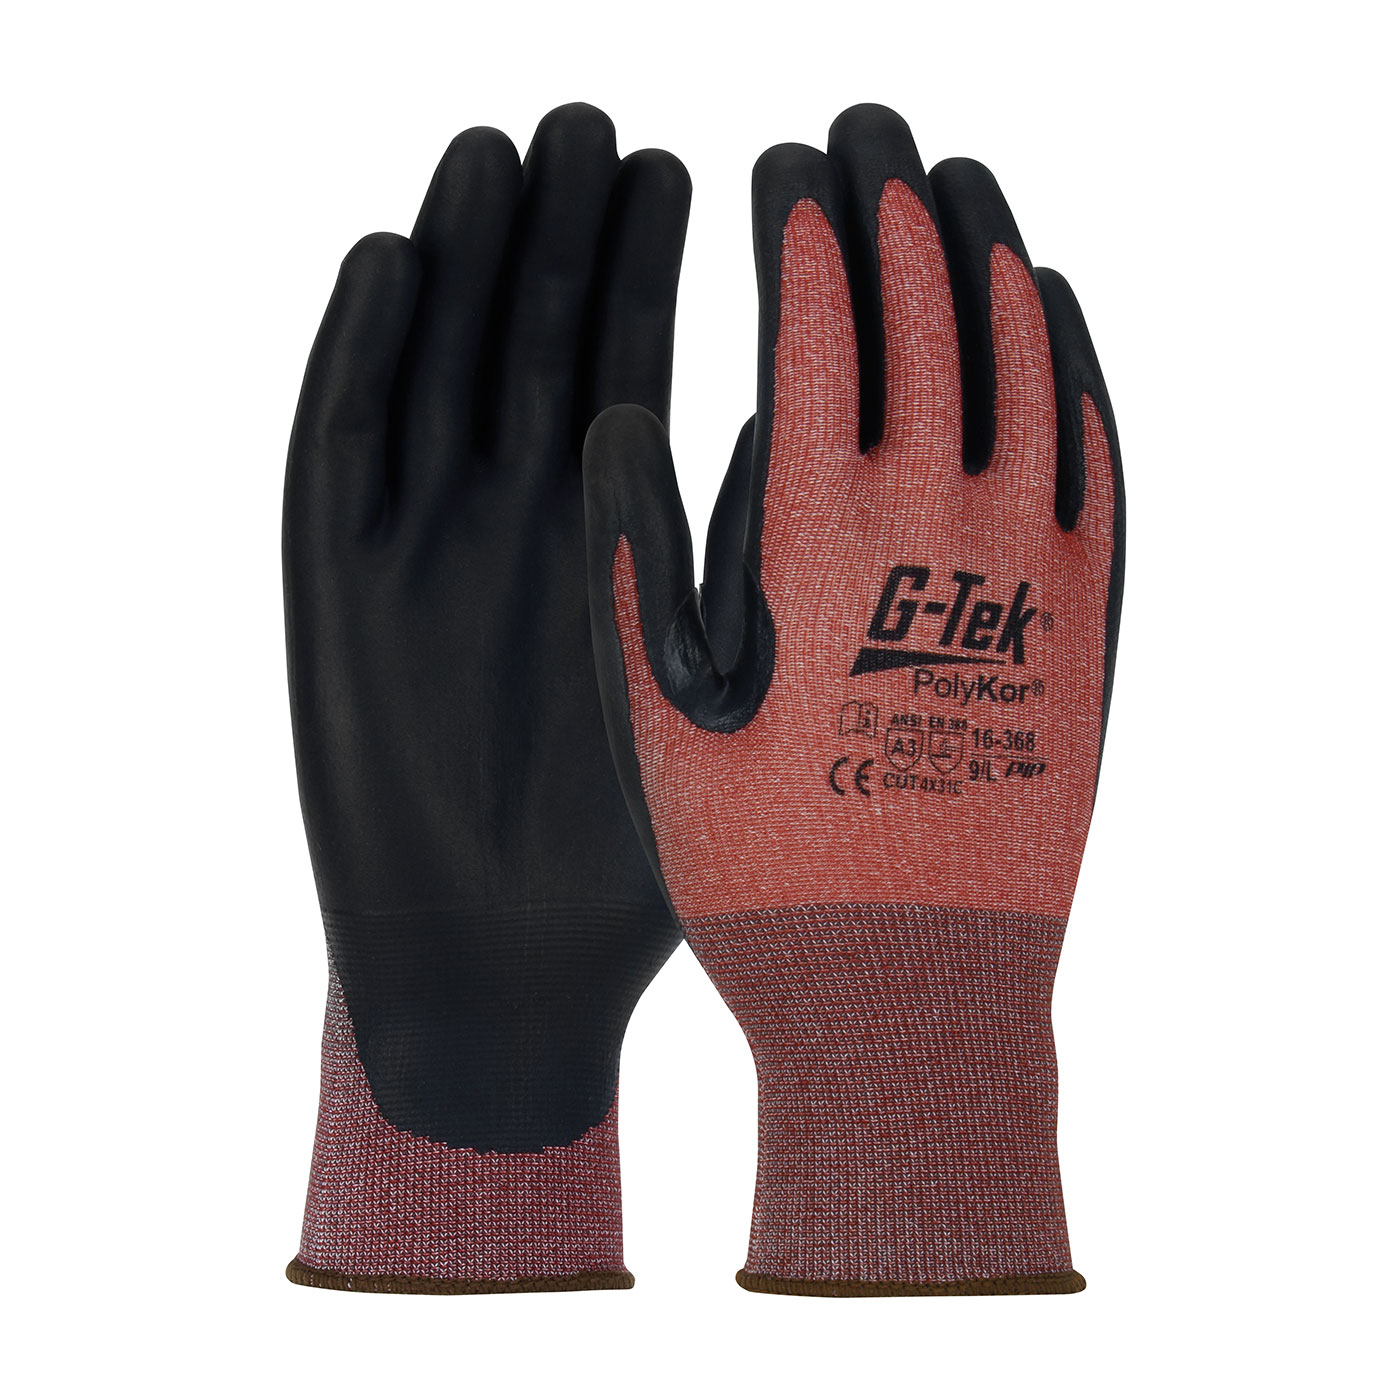 PIP 16-368/L G-Tek PolyKor X7 Seamless Knit PolyKor X7 Blended Glove with NeoFoam Coated Palm & Fingers - Touchscreen Compatible - Large PID-16368L